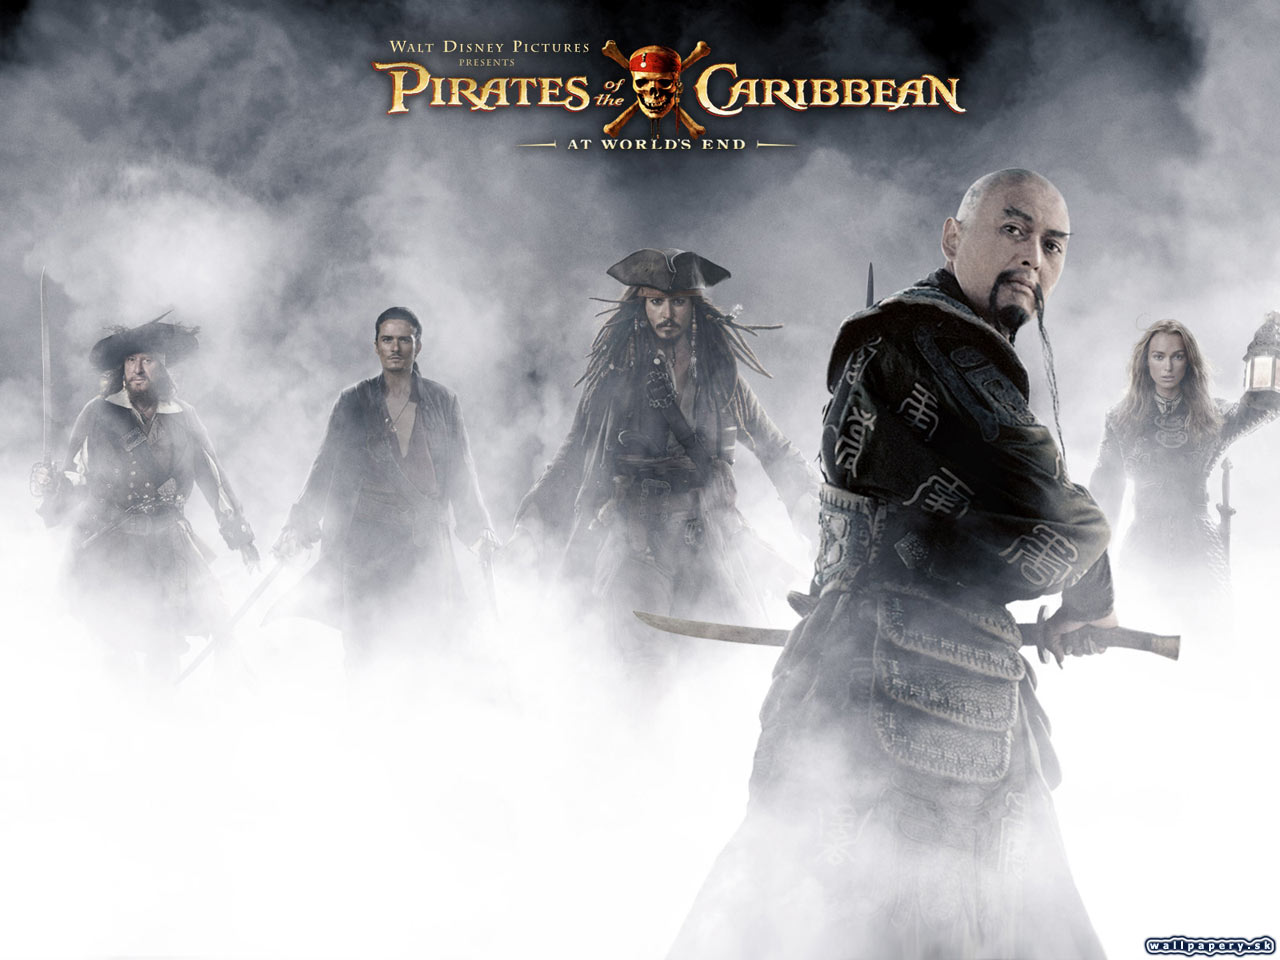 Pirates of the Caribbean: At World's End - wallpaper 5